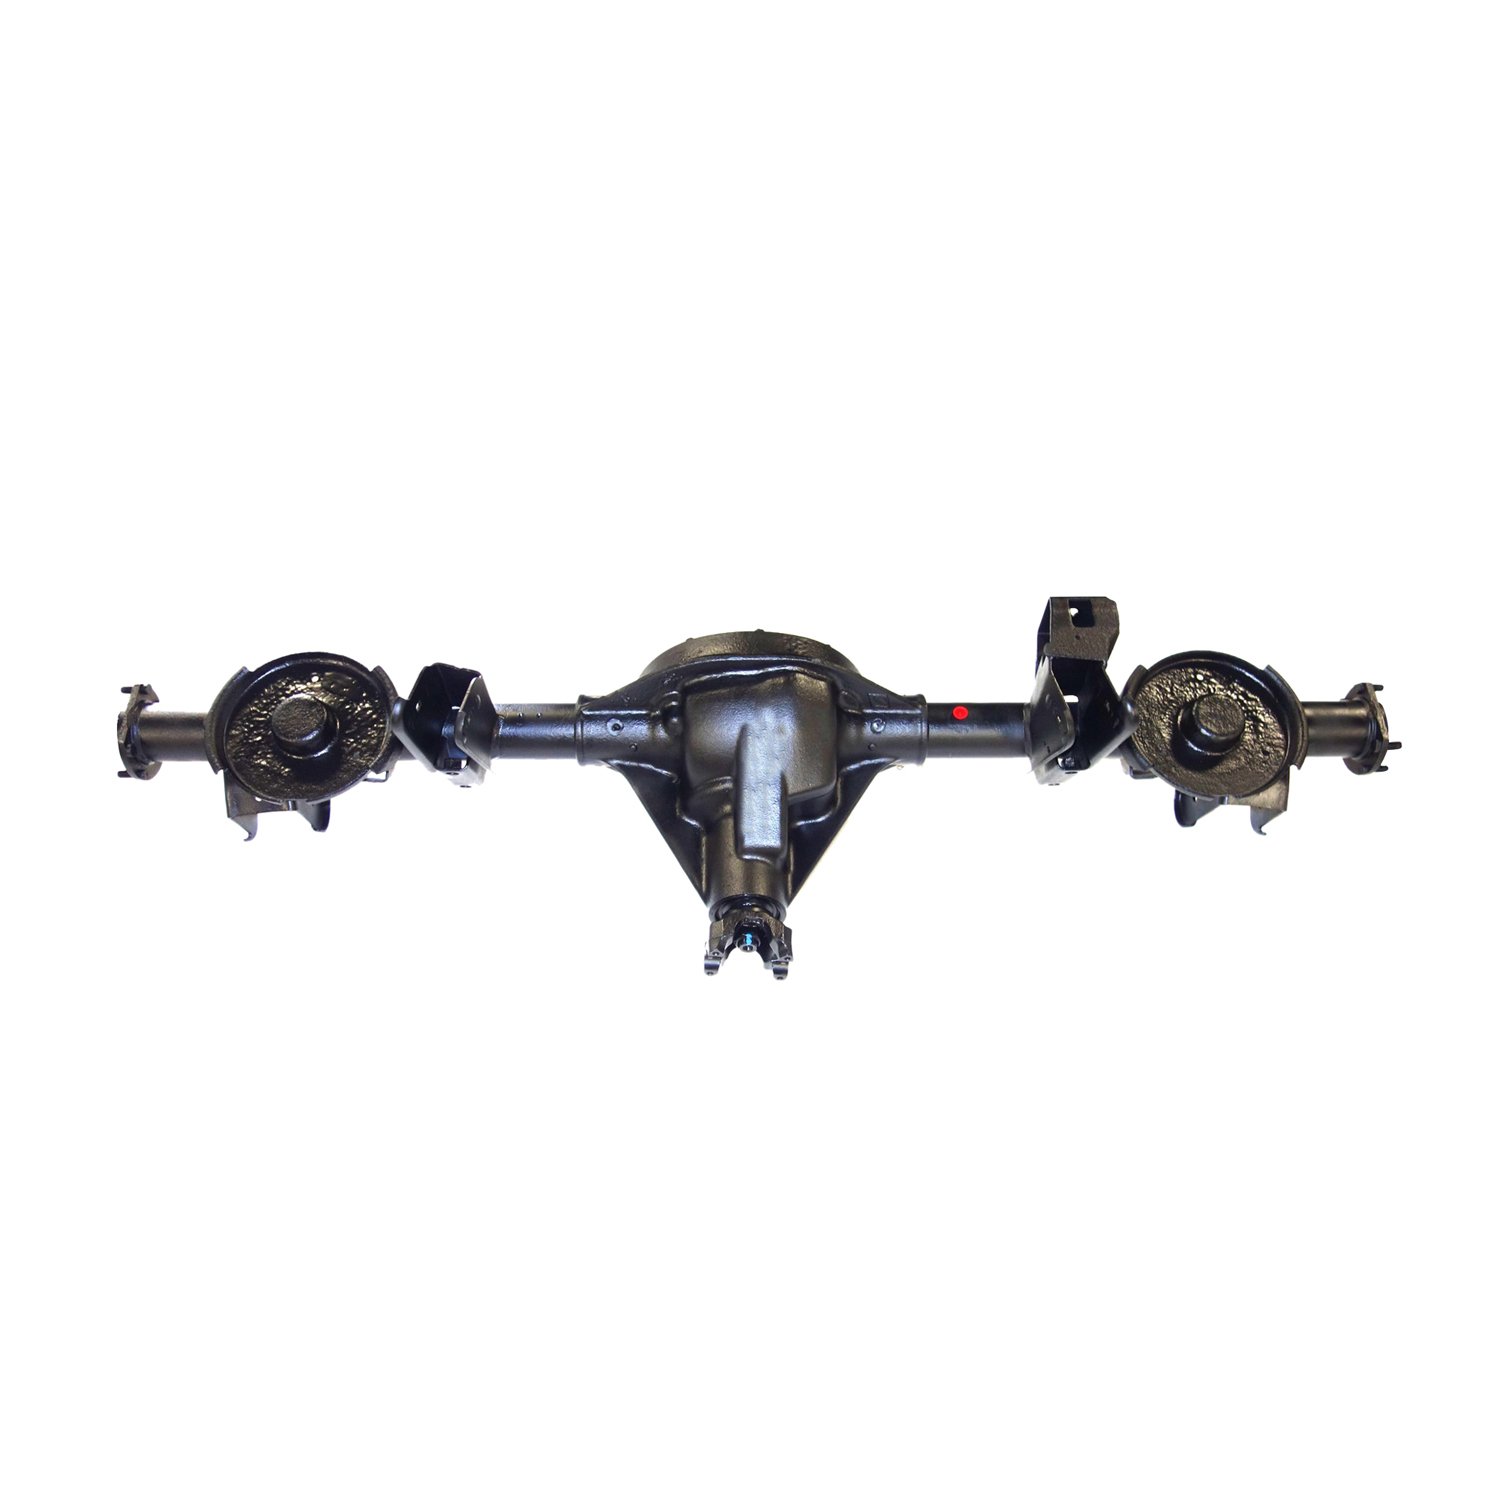 Remanufactured Complete Axle Assy for Dana 35 2002 Liberty 4.11 , 3.7l w/o ABS, Posi LSD